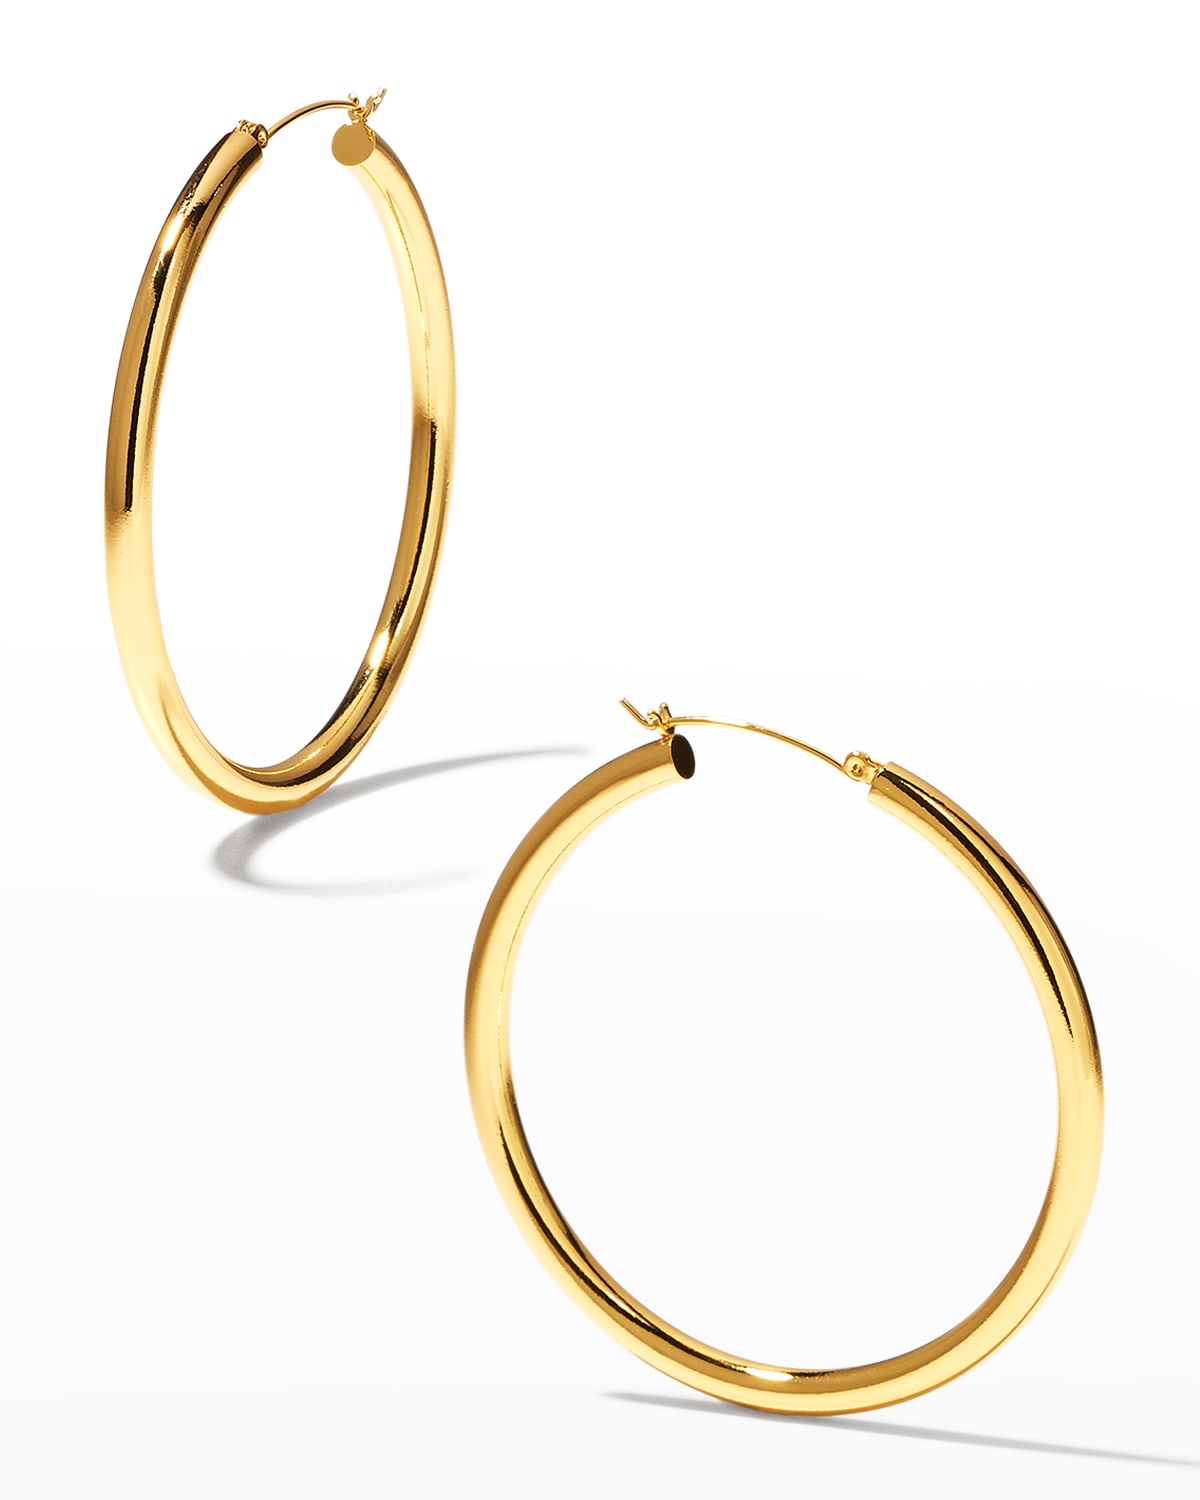 Paradise Jewelers 14K Yellow Gold Two Tone Curled Hoop Earrings